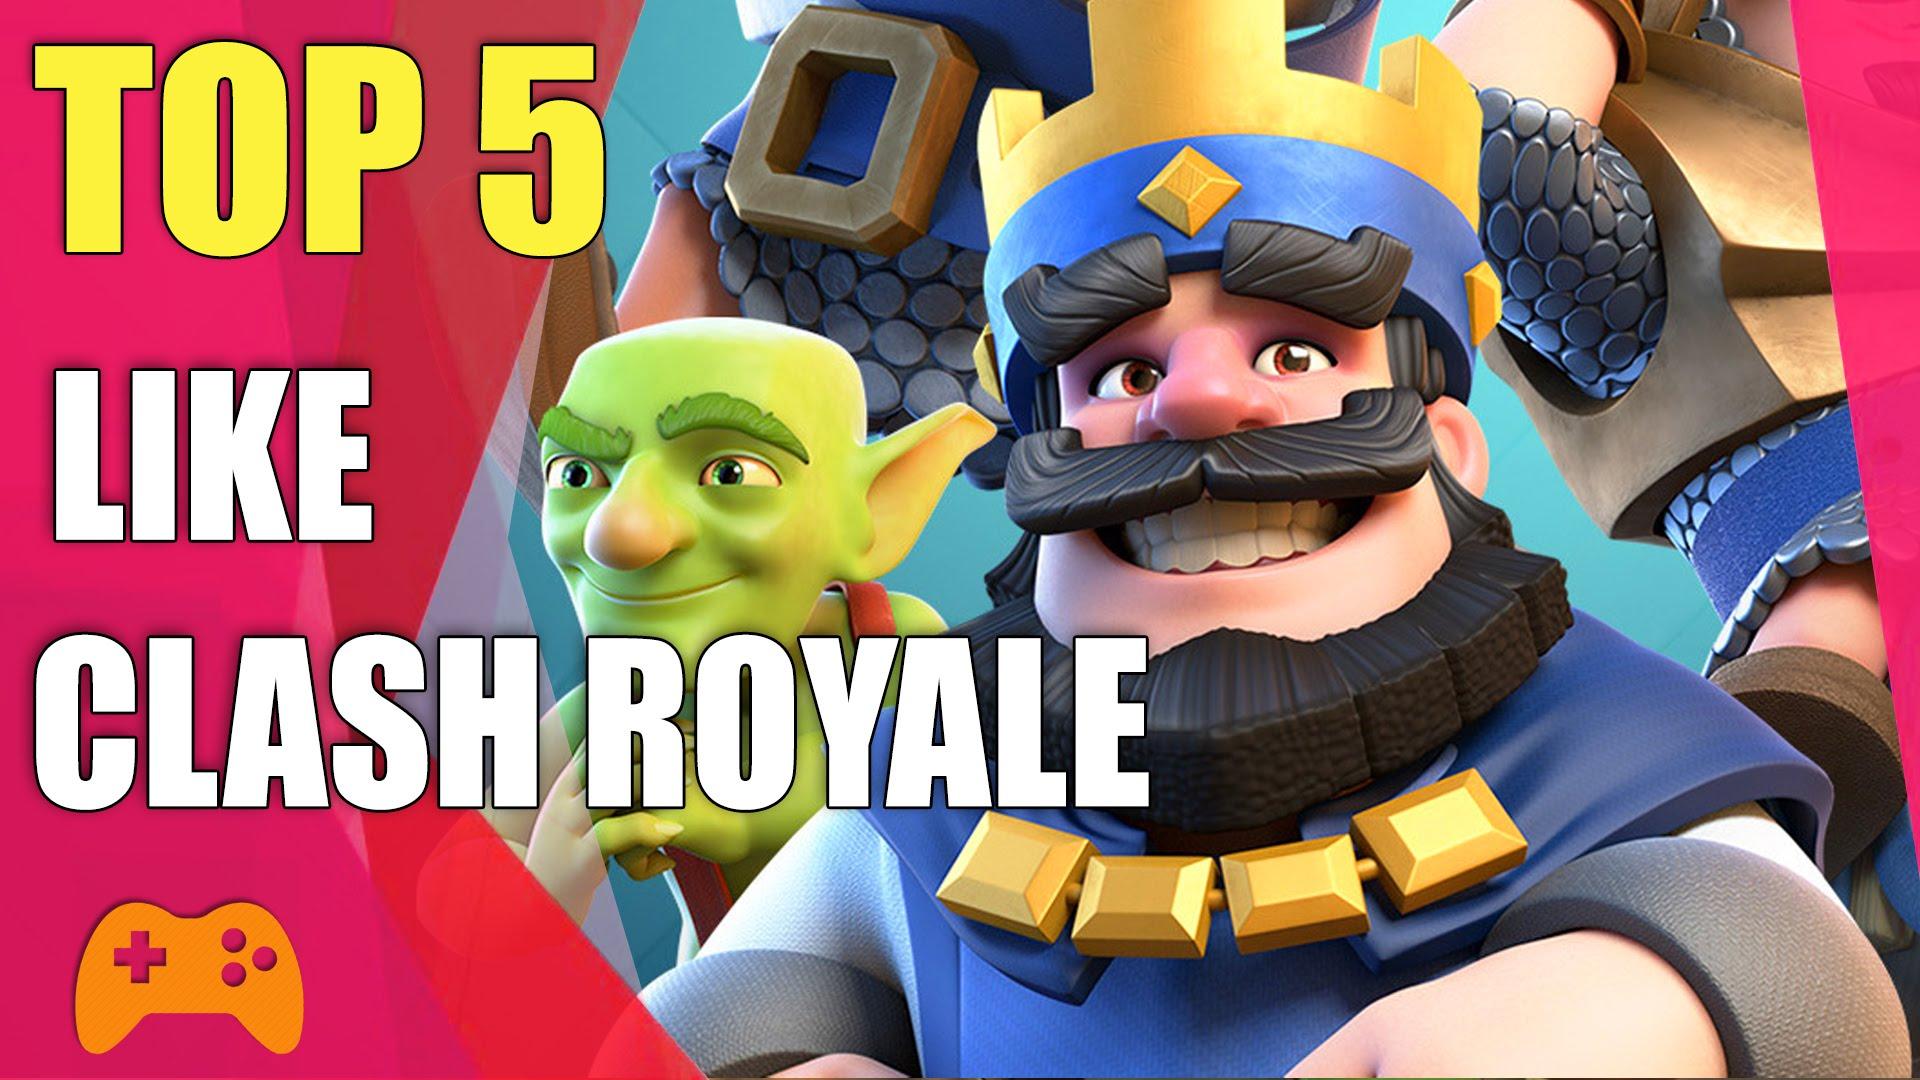 Best Games Like Clash Royale